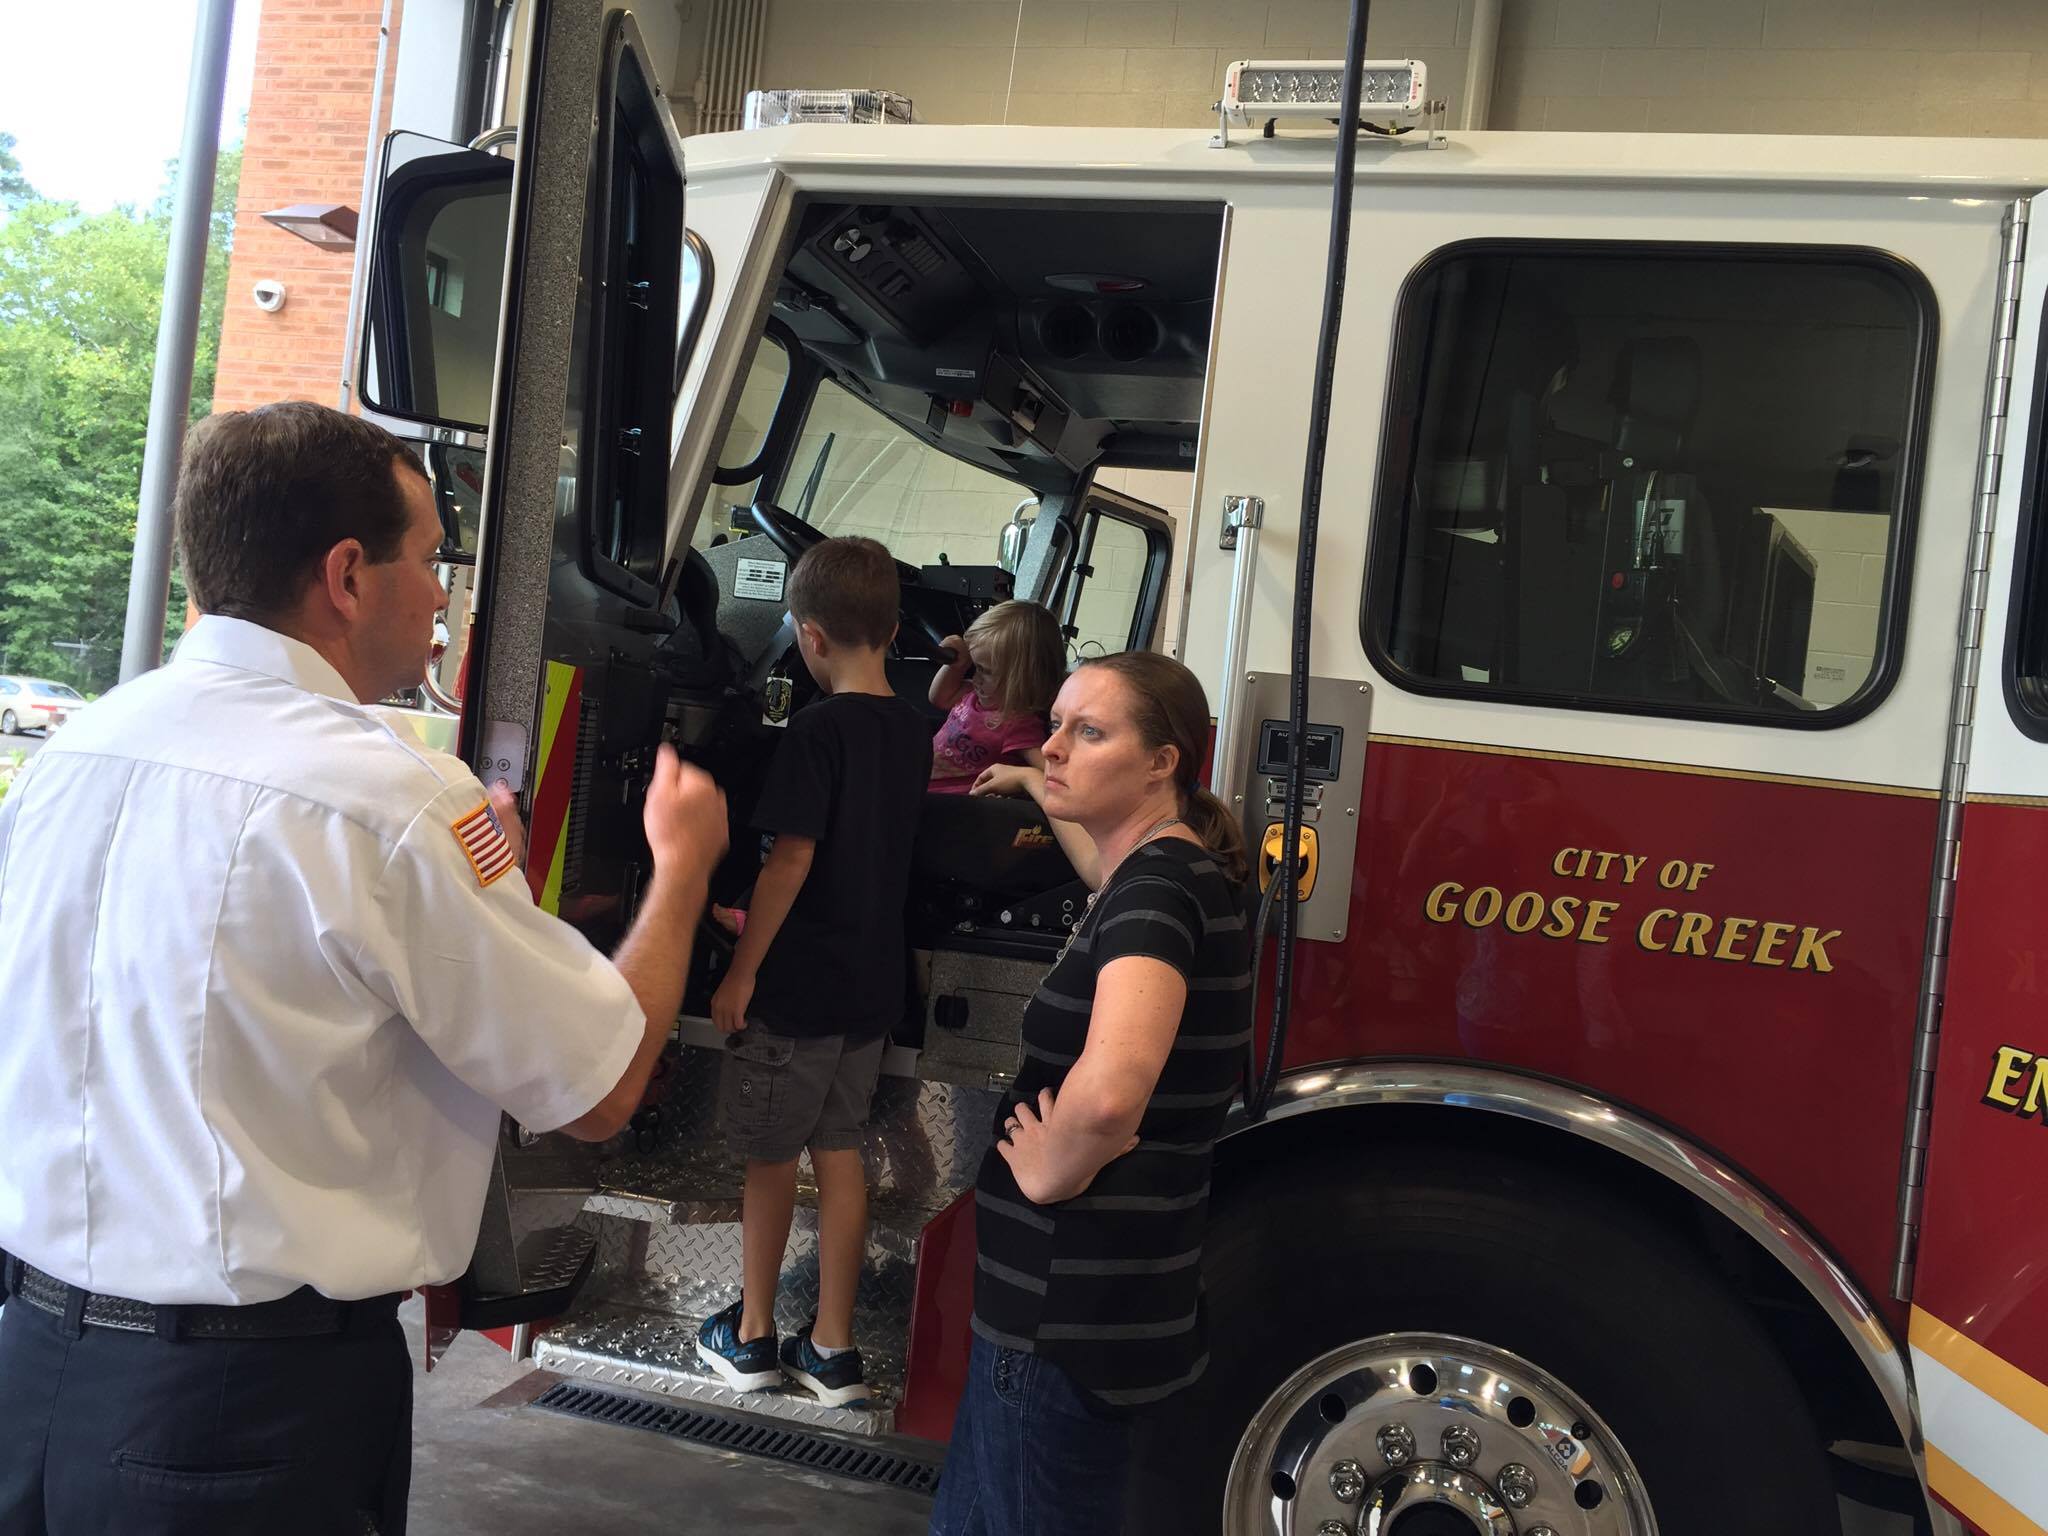 Kids got to check out the fire truck inside.